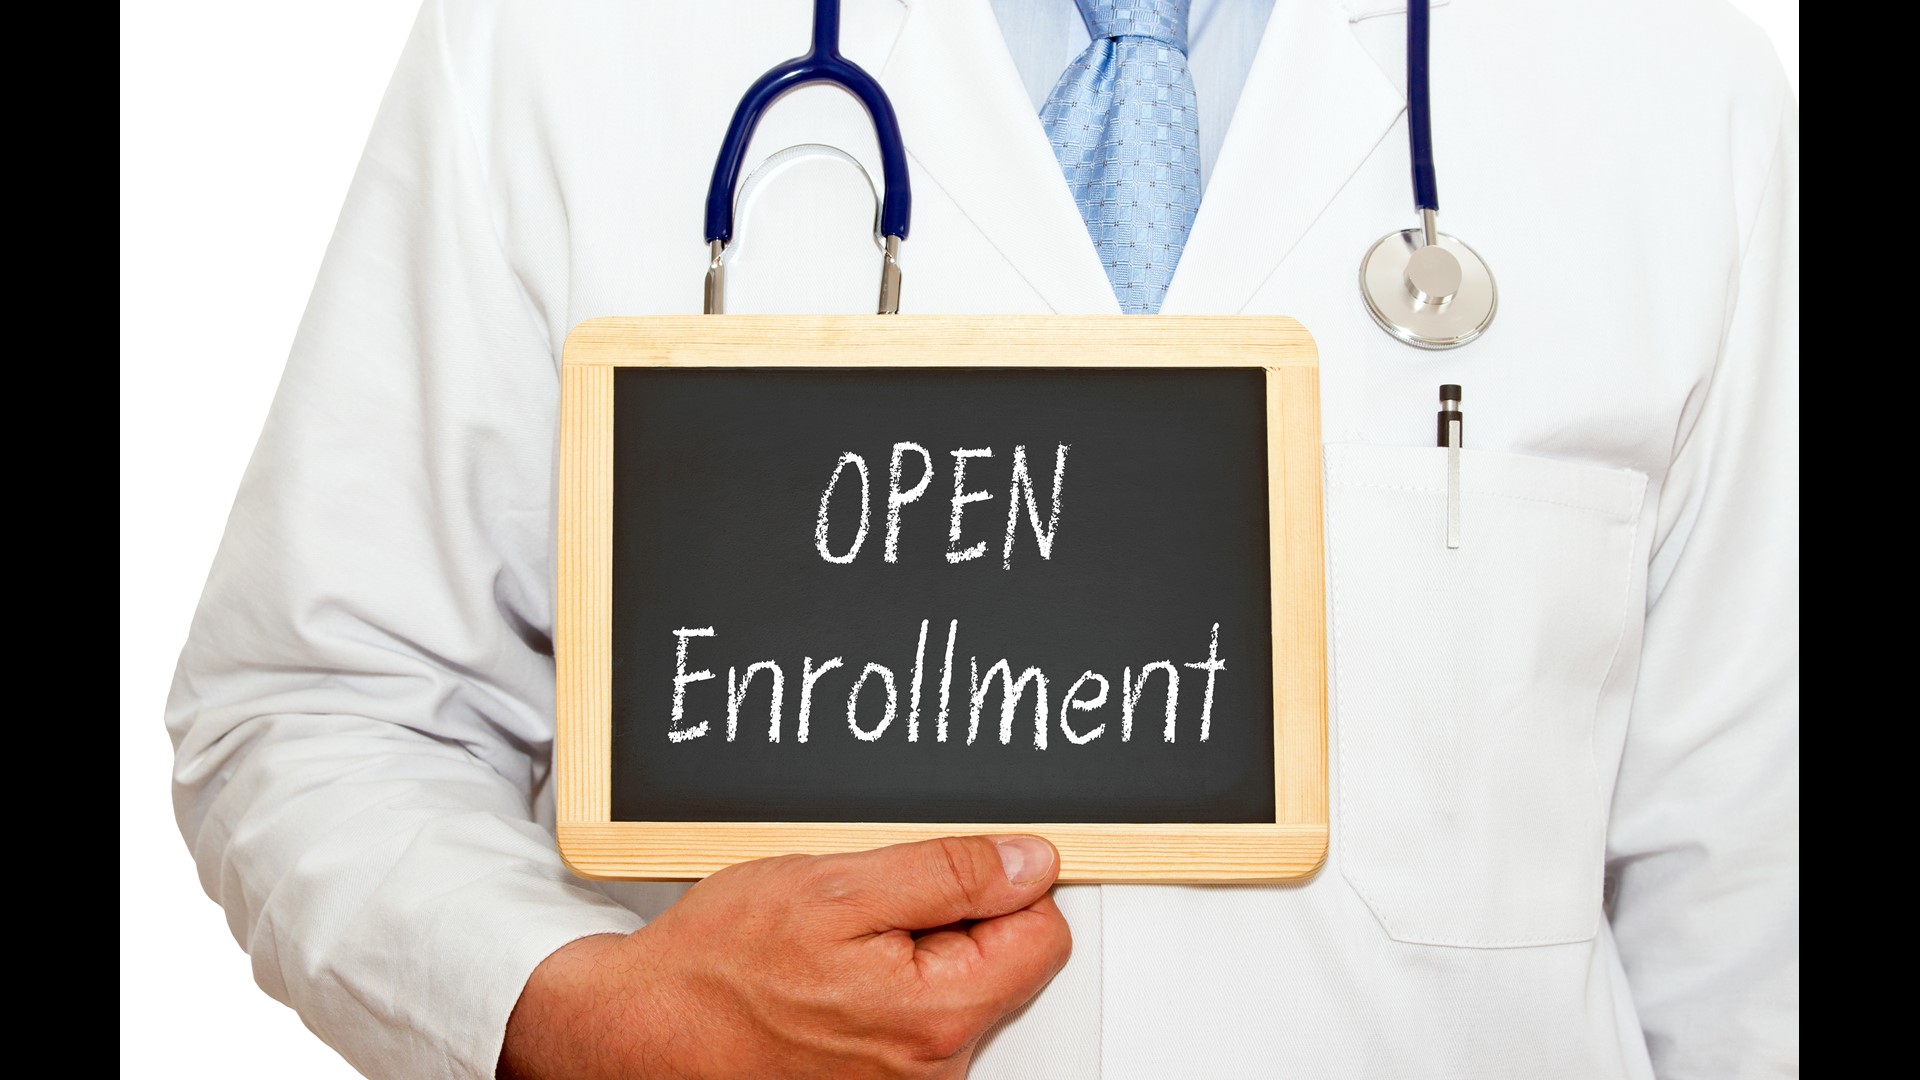 Medicare Annual Enrollment is here. This is a very important time for seniors. Sentara Health Plans is here with info you need to know before open enrollment.